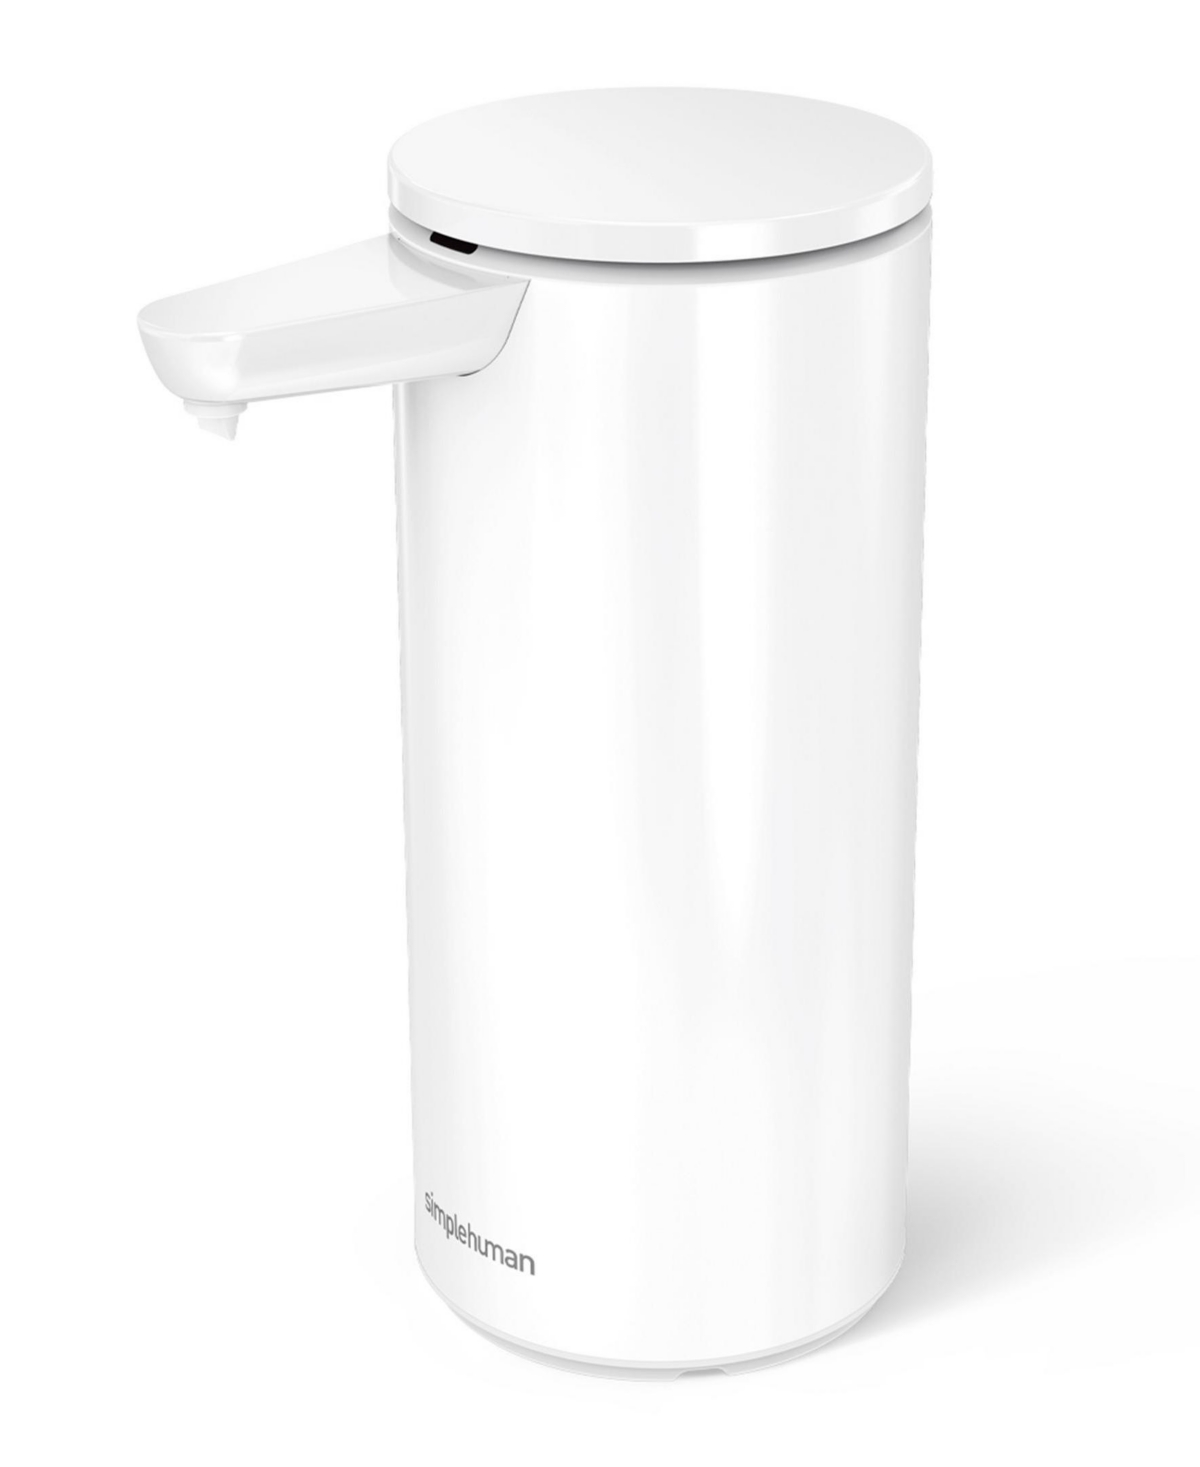 Rechargeable Sensor Soap Pump, 14 oz - White Stainless Steel